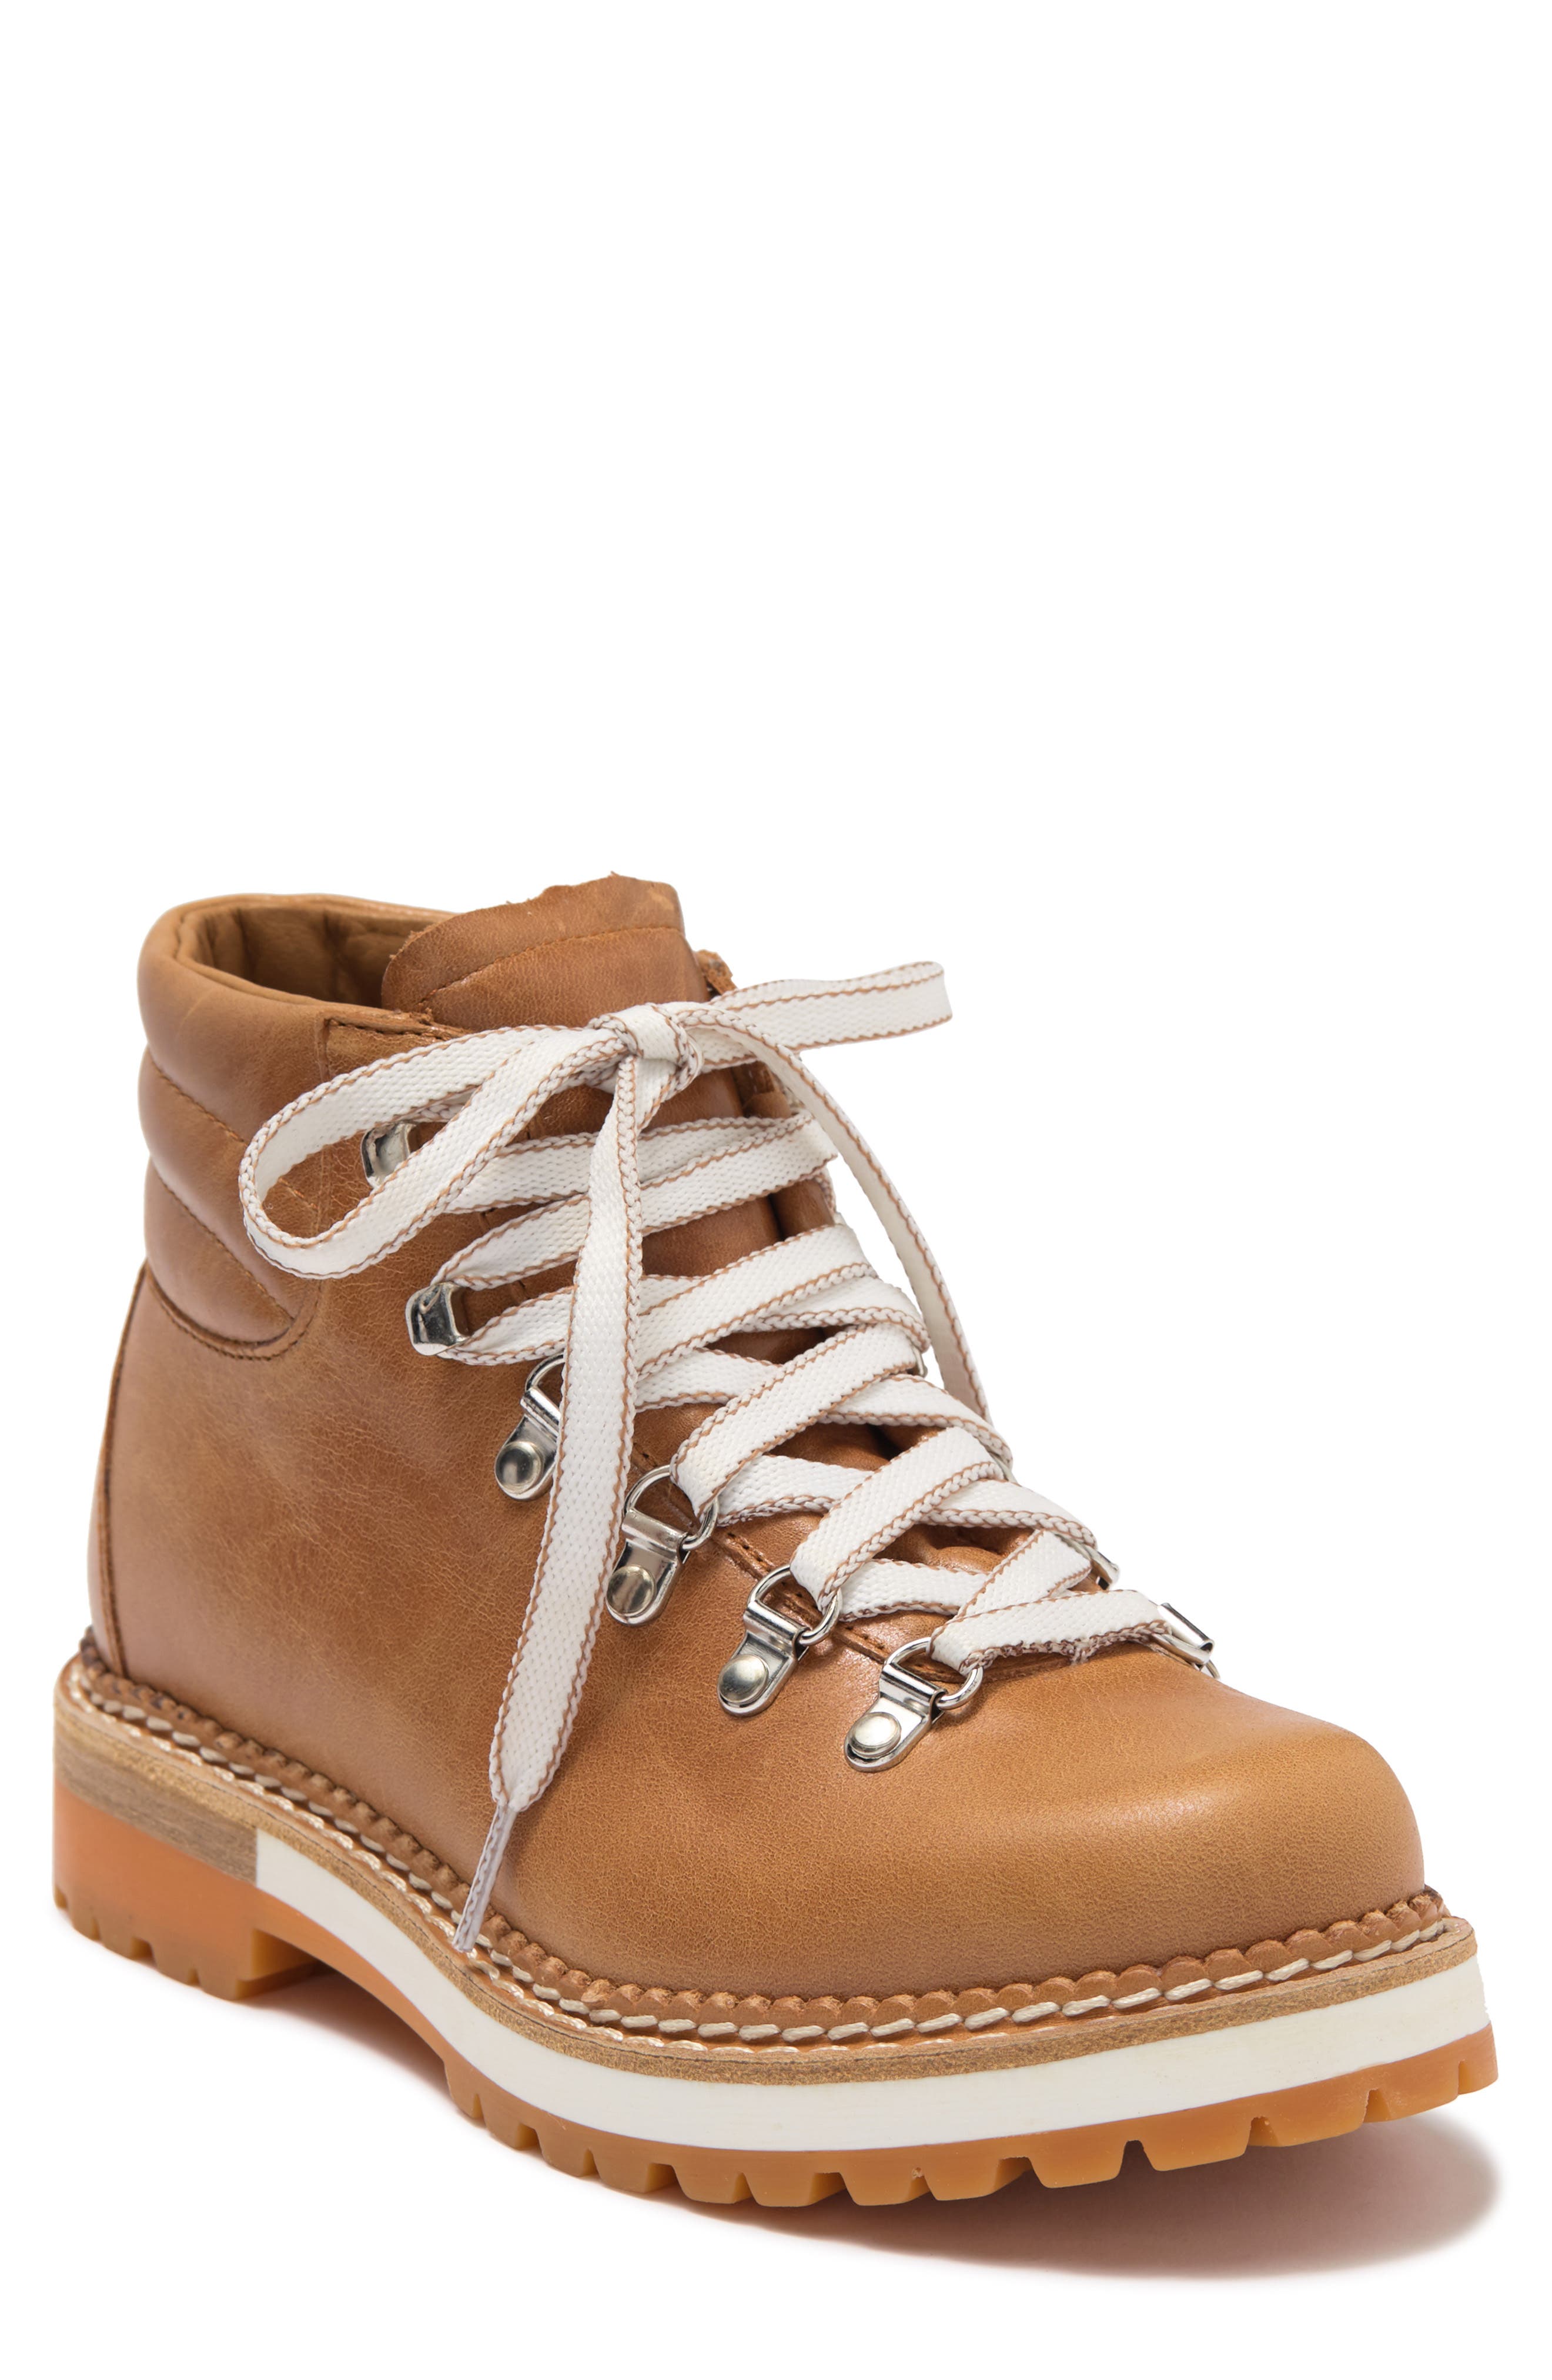 Montelliana 1965 Lug Sole Leather Hiker Boot In Cuir | ModeSens